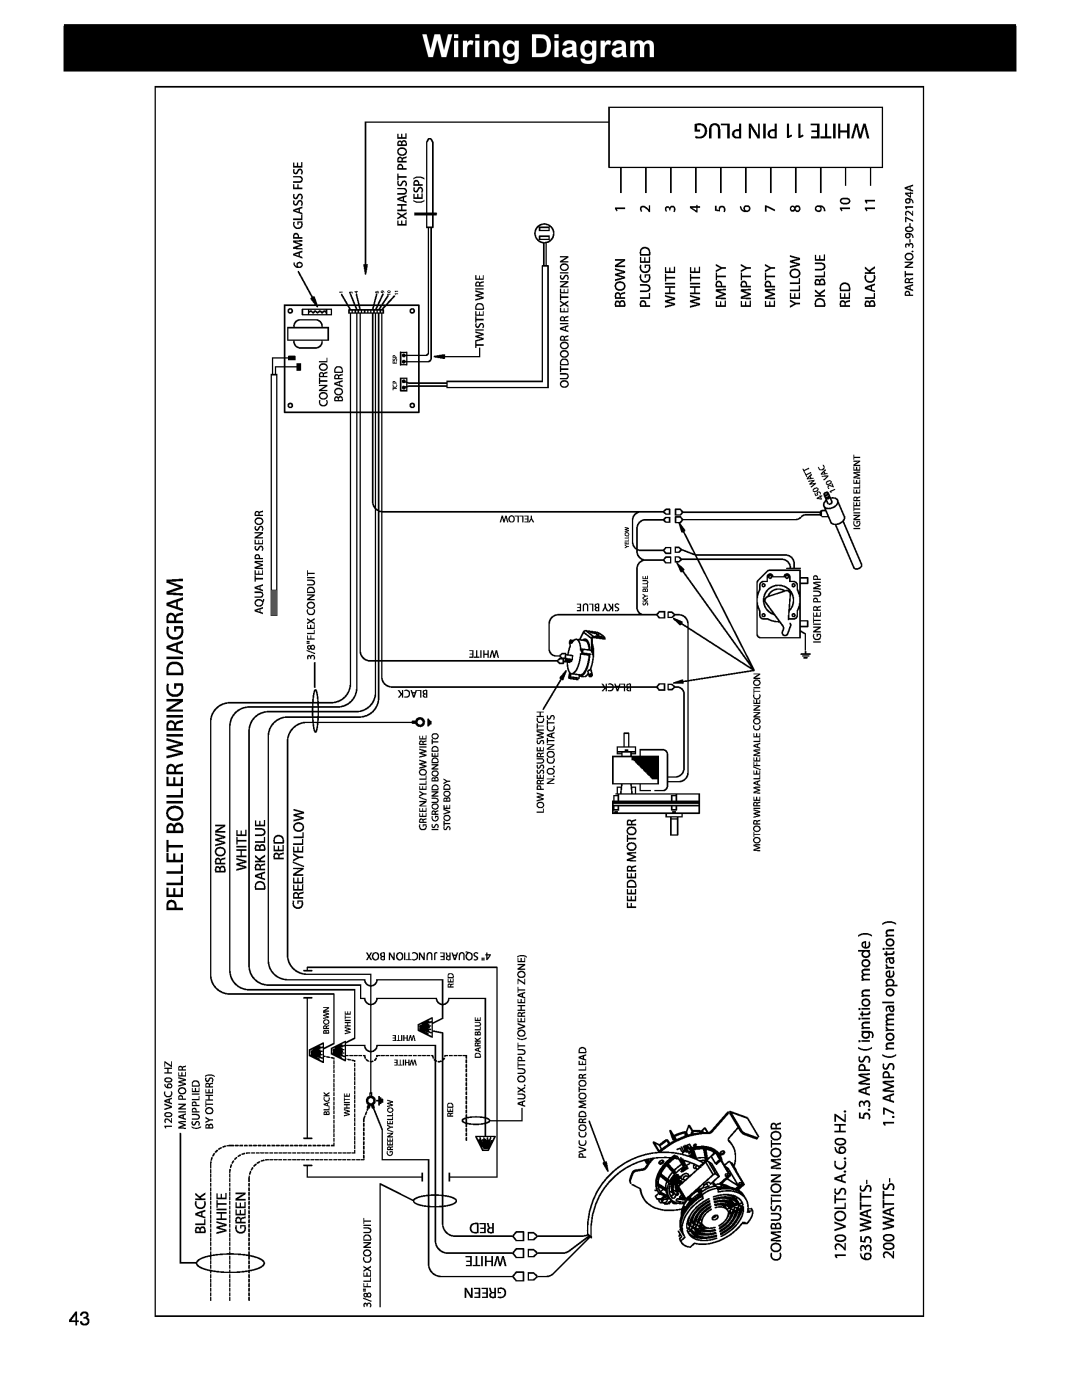 Hearth and Home Technologies BH 105 manual Pellet Boiler Wiring Diagram 